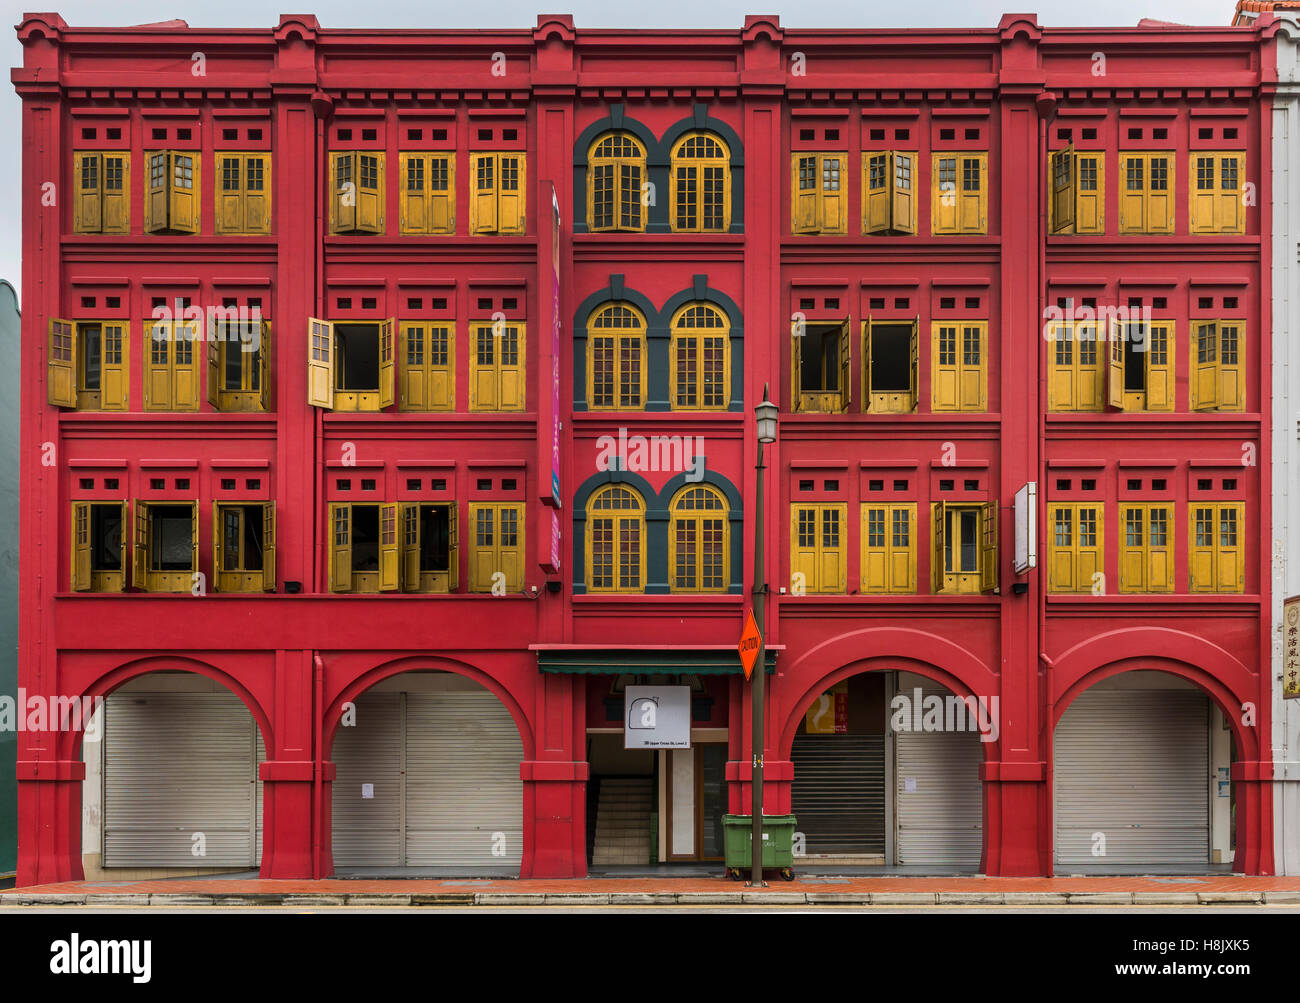 Colorful facade of a building in Chinatown. Singapore Stock Photo